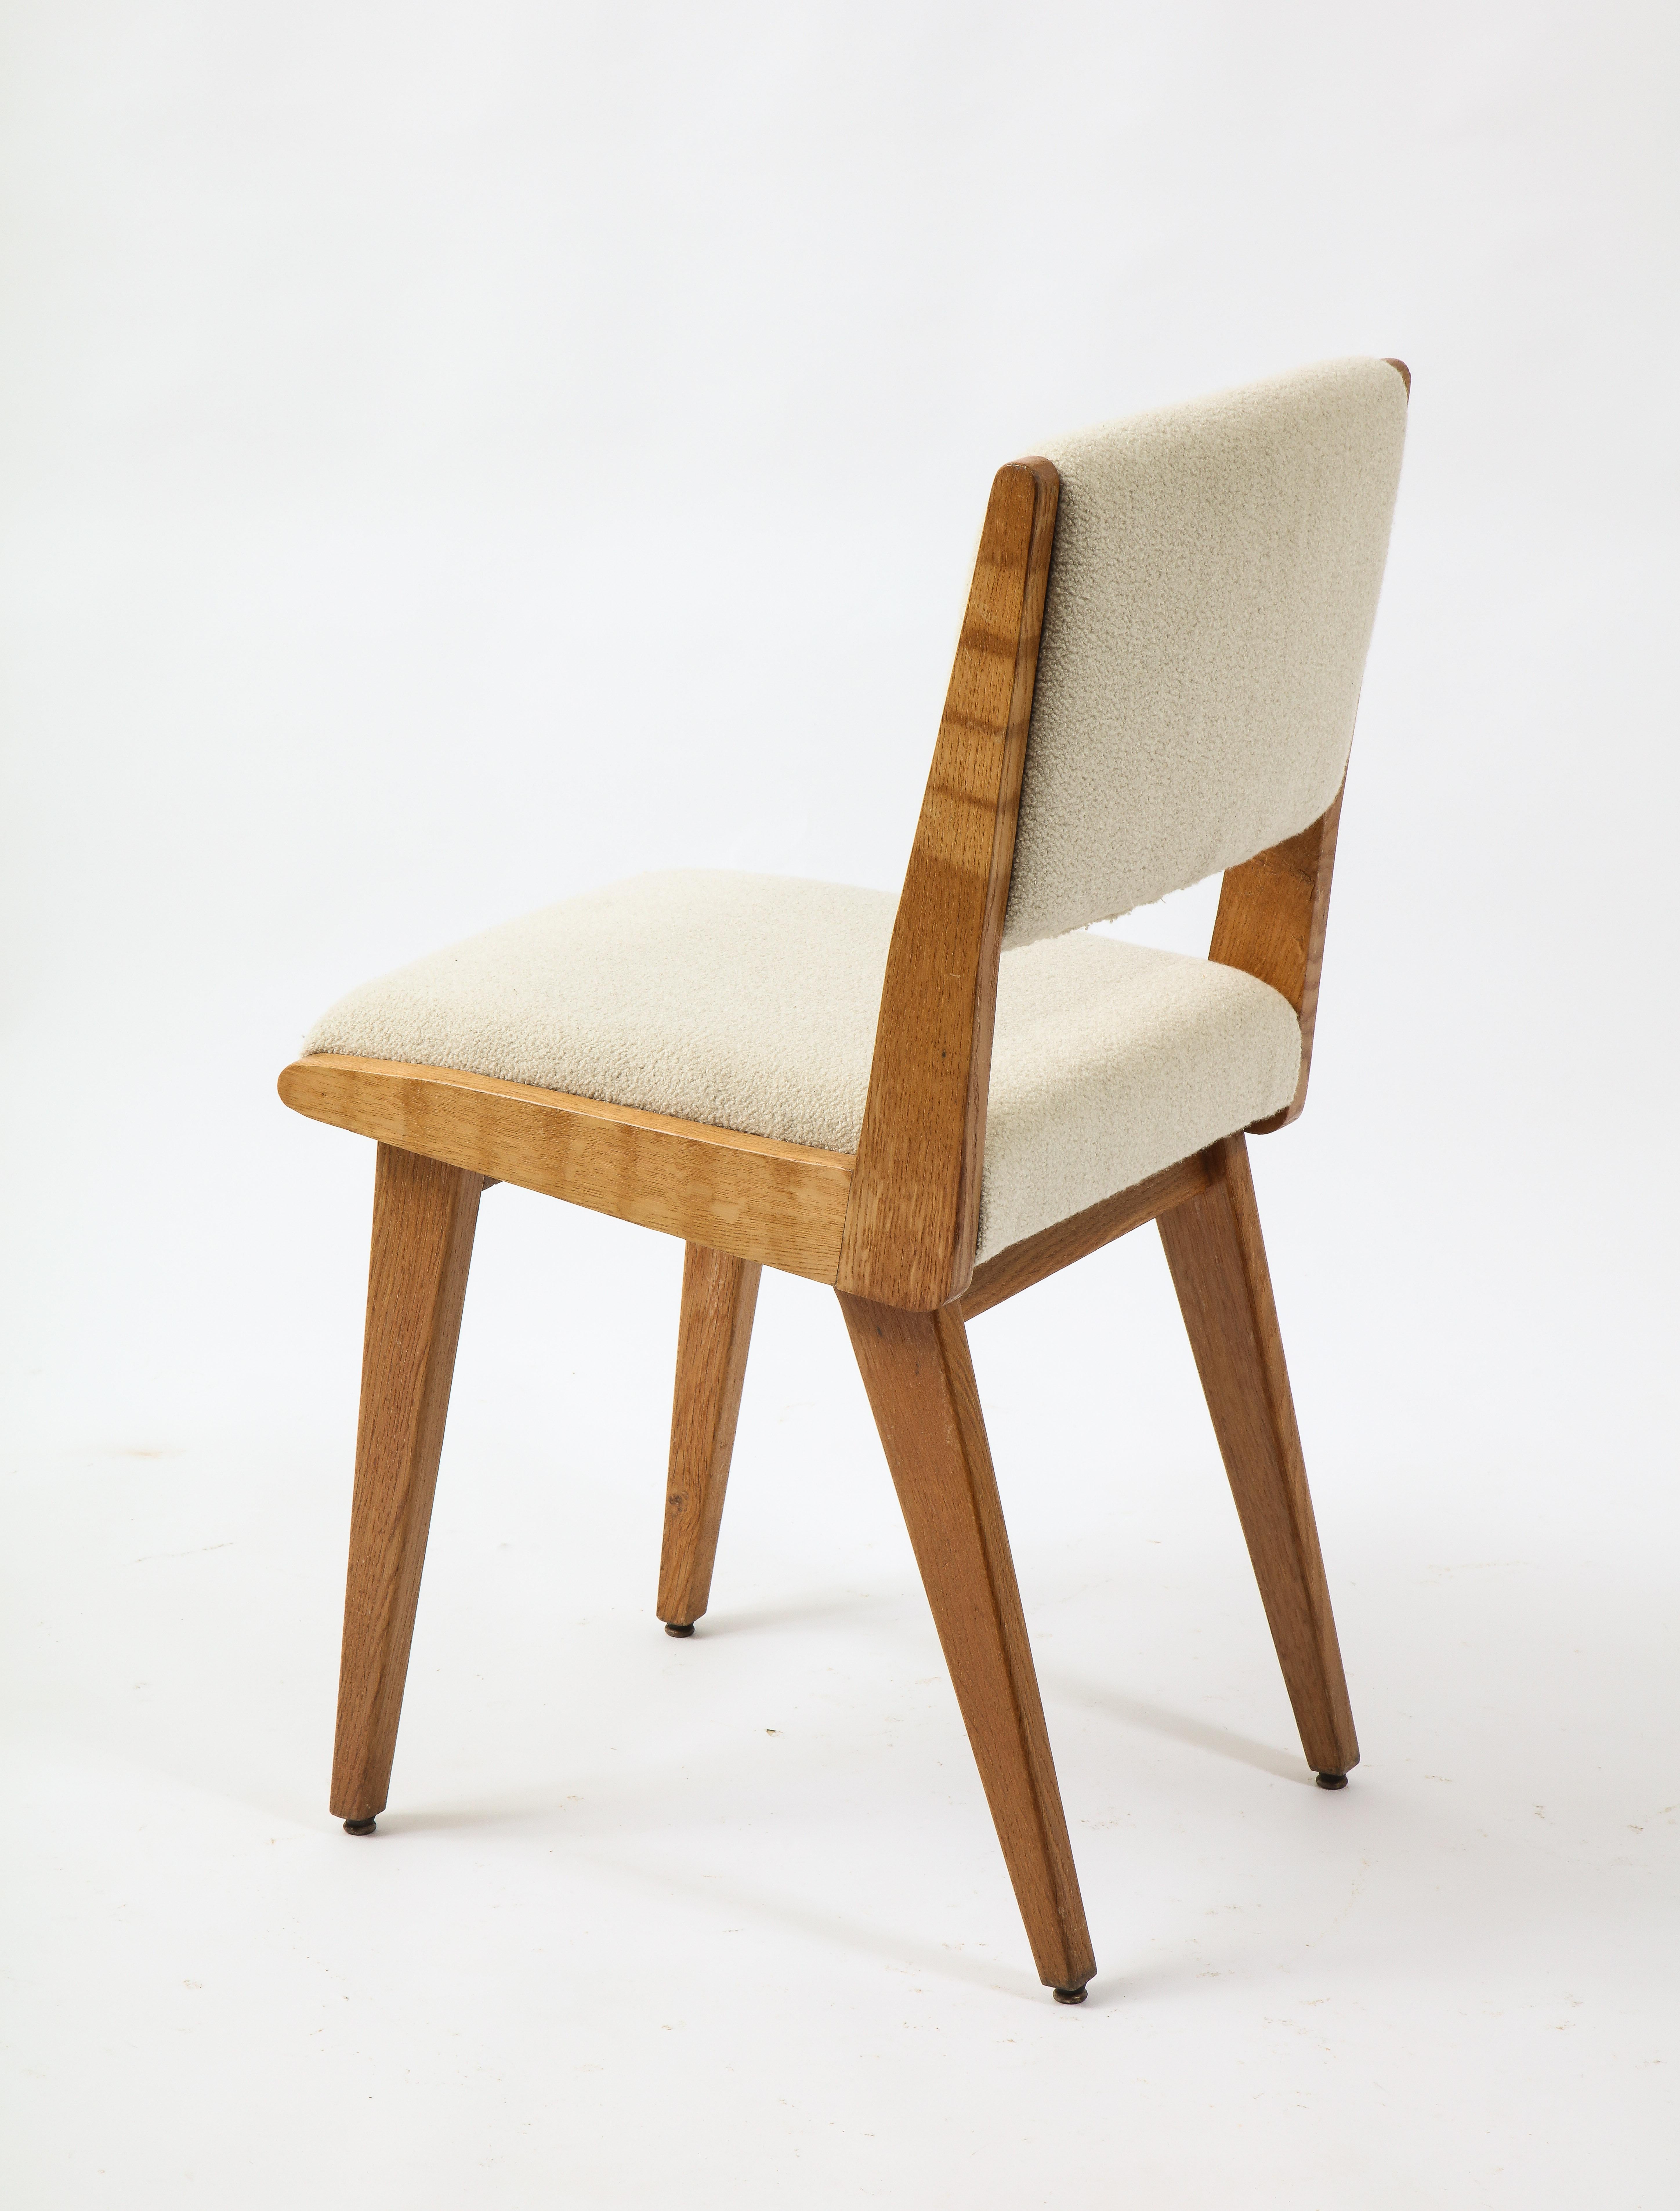 Upholstery Jens Risom Set of 12 Upholstered Oak Dining Side Chairs, USA 1960's For Sale